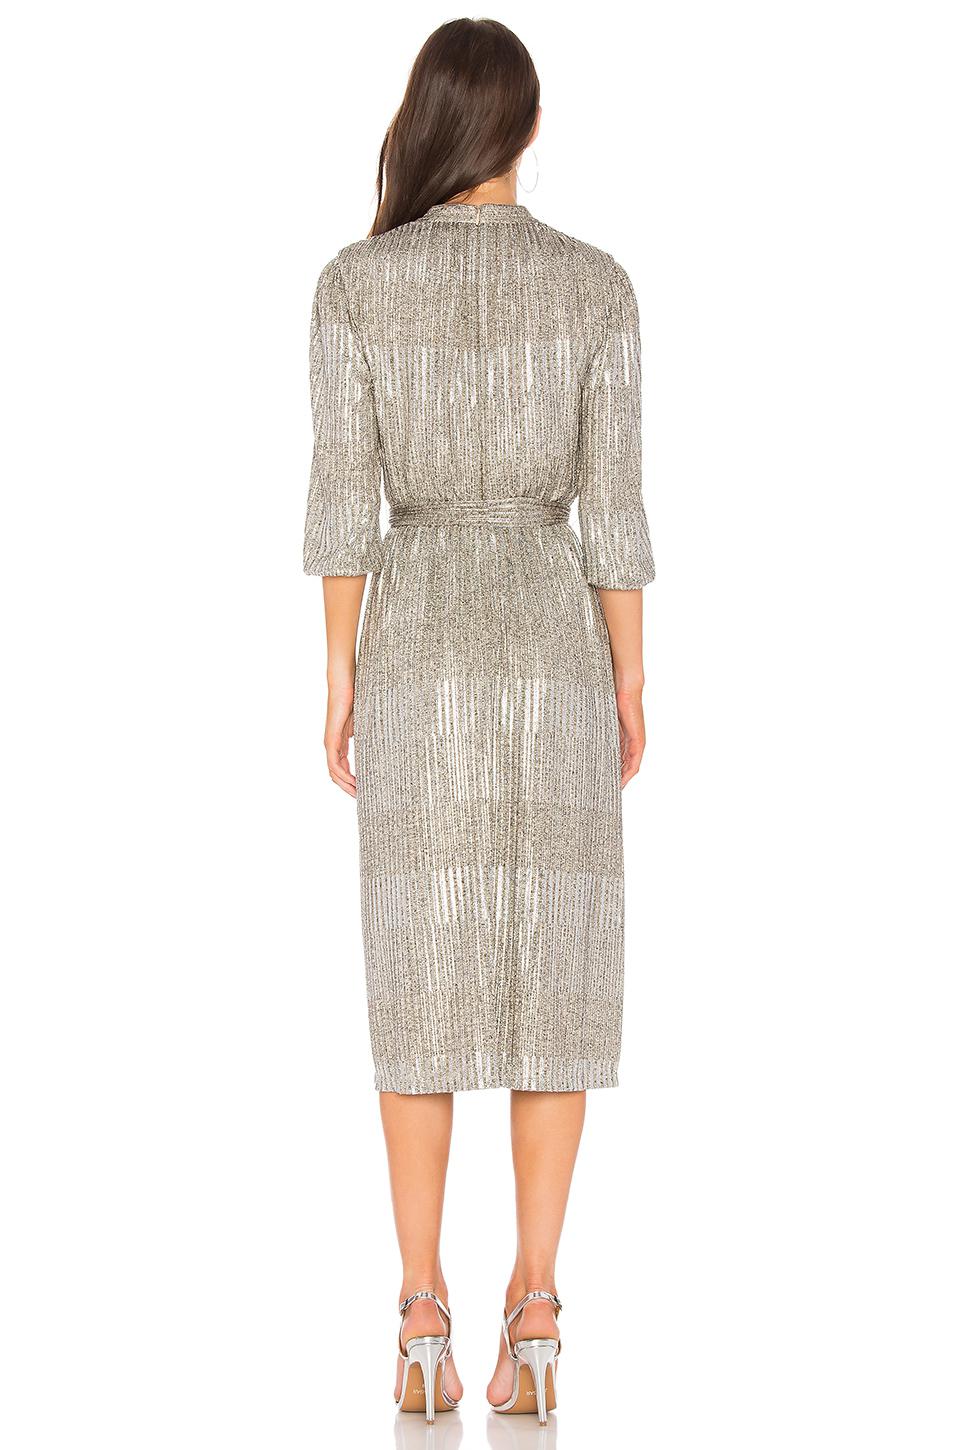 Alice + Olivia Synthetic Katina Wrap Dress in Gold (Metallic) - Lyst